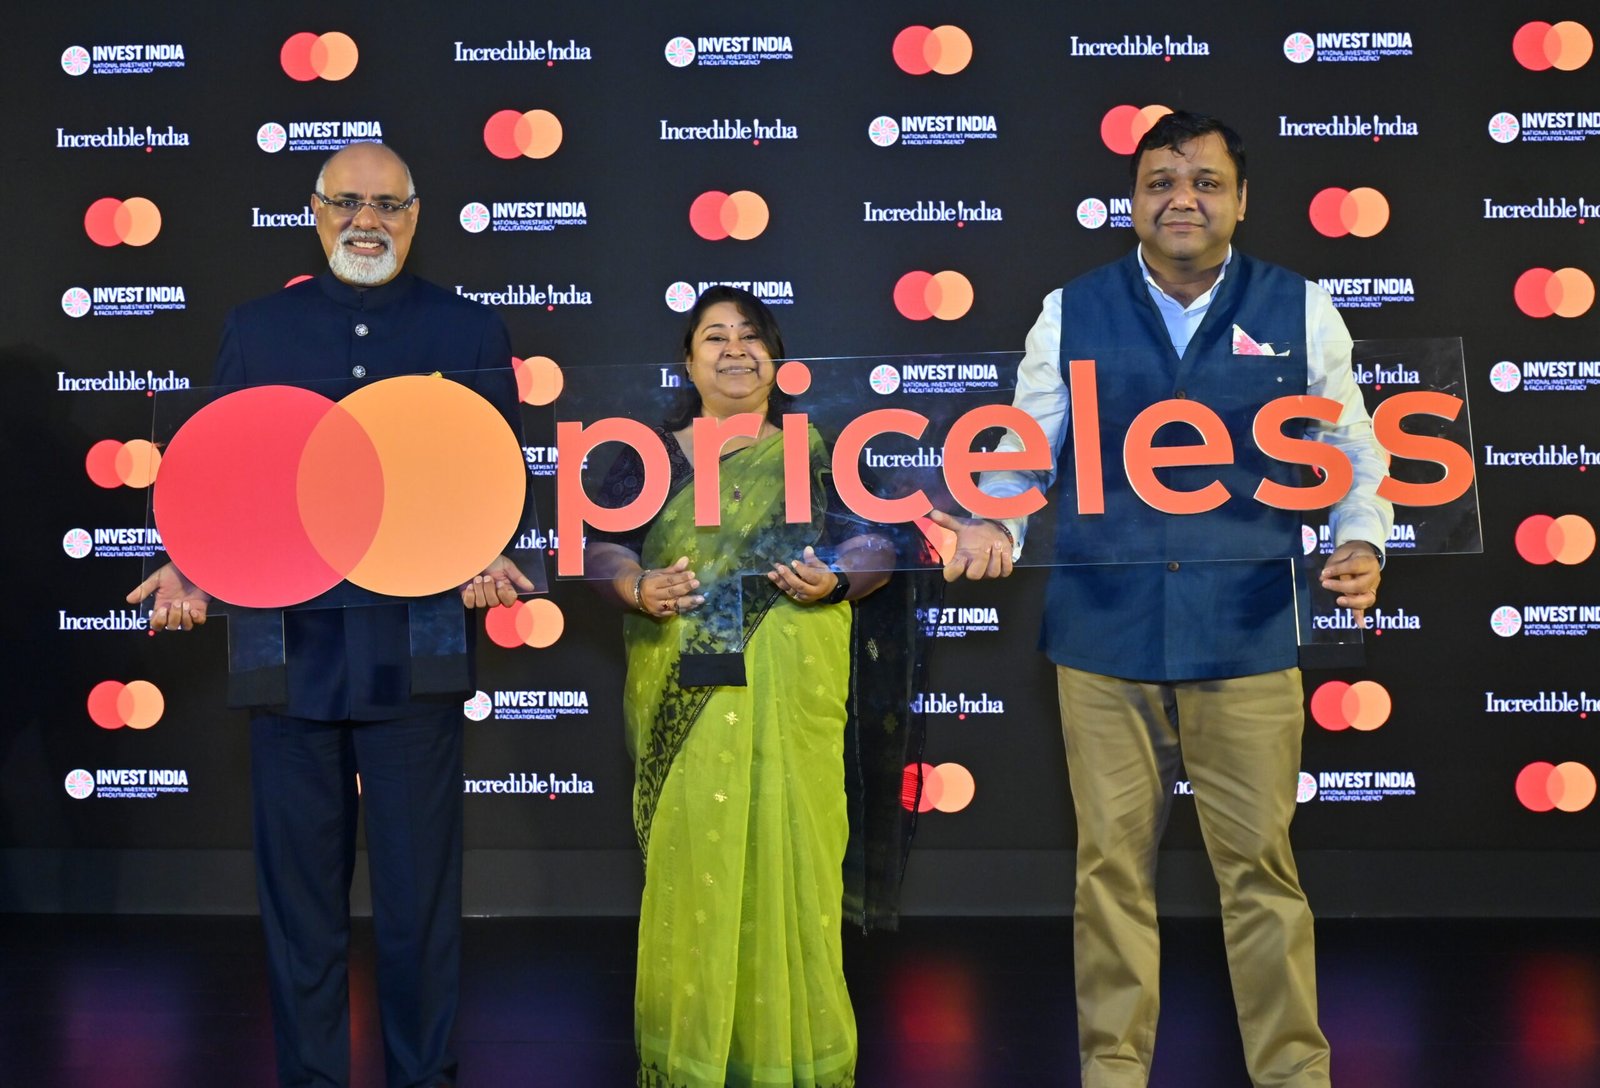 Mastercard and Invest India redefine experiential travel: Unveil enhanced priceless.com in India for immersive cultural experiences